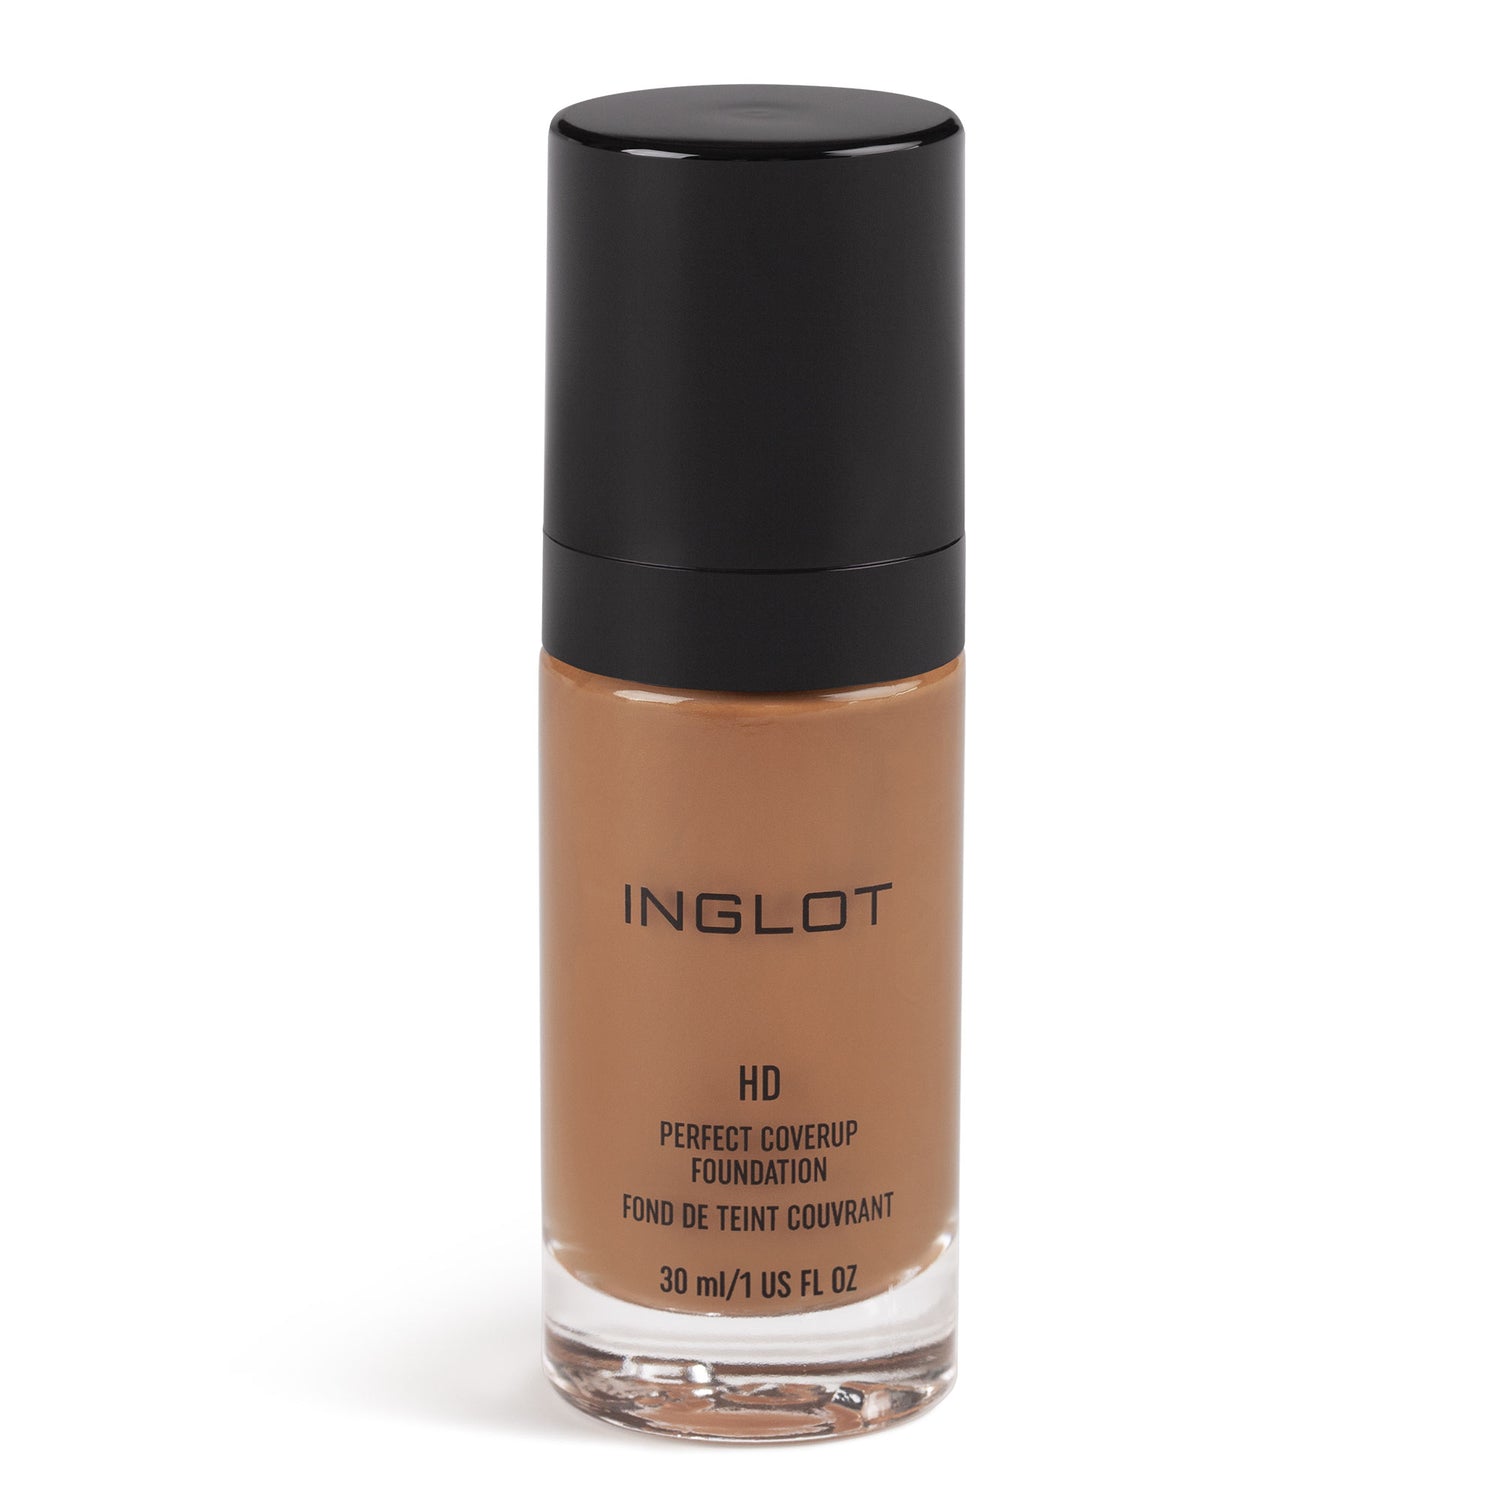 HD Perfect Coverup Foundation 85 - Inglot Cosmetics